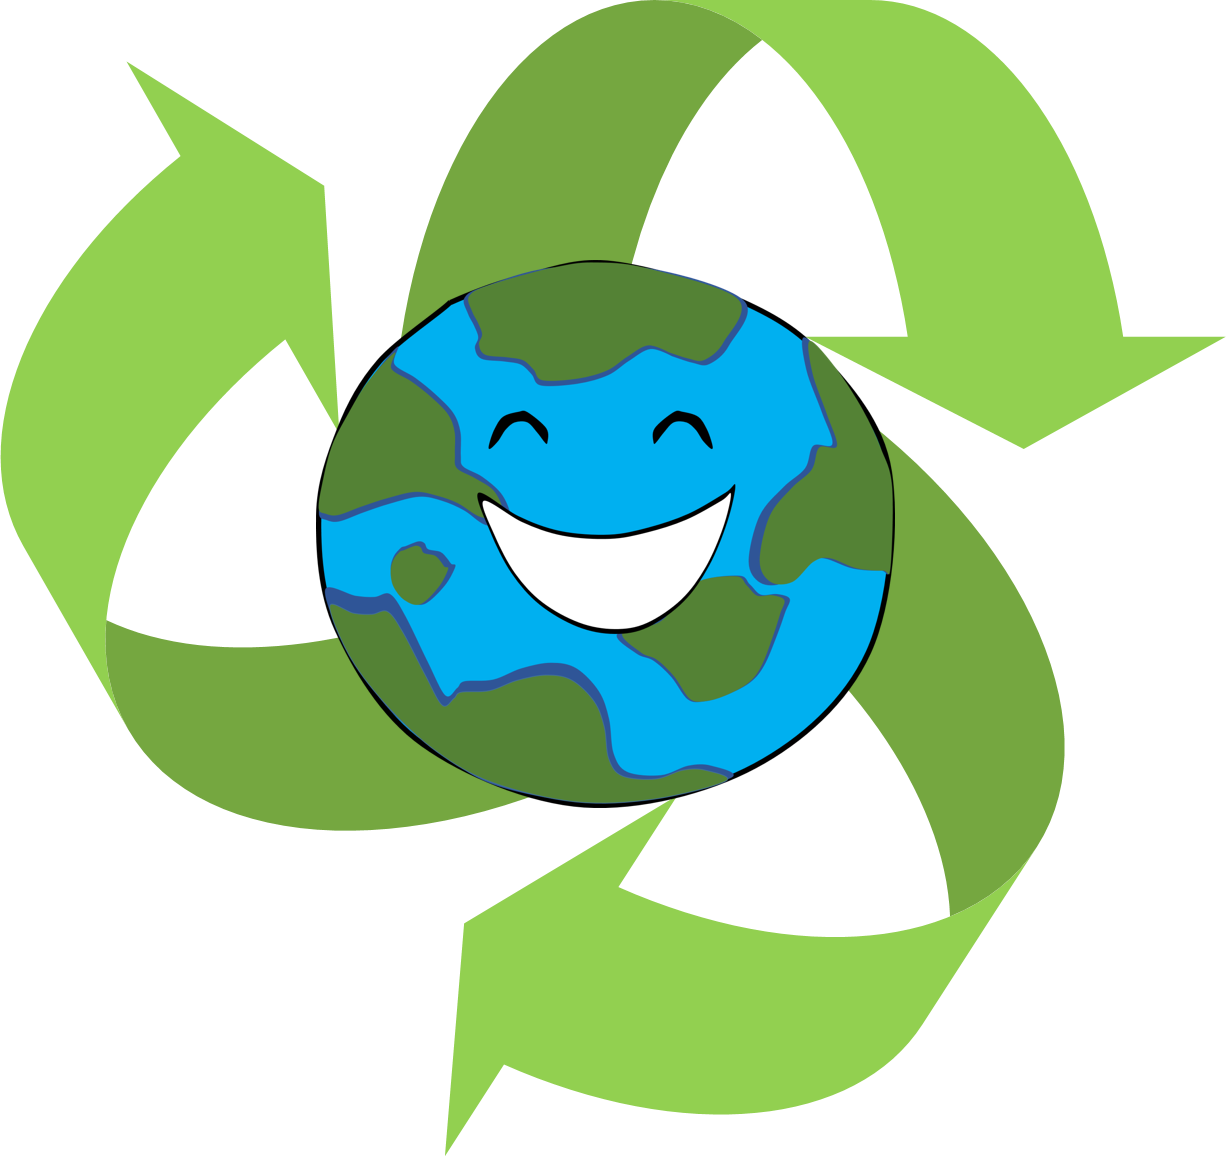 Reduce Reuse Recycle Club Transparent Image Clipart